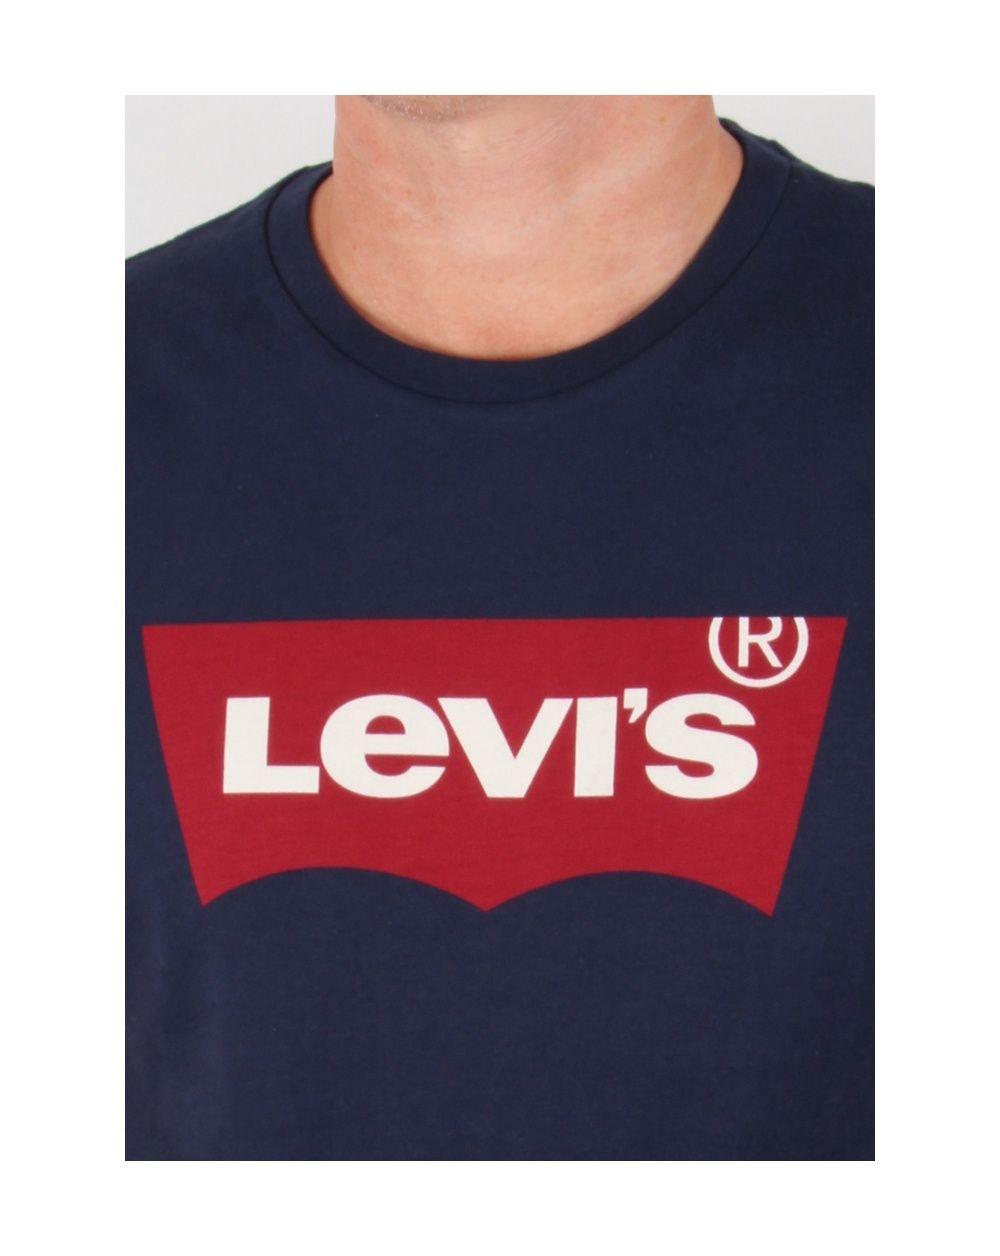 Red and Navy Blue Logo - levis logo tee, navy blue